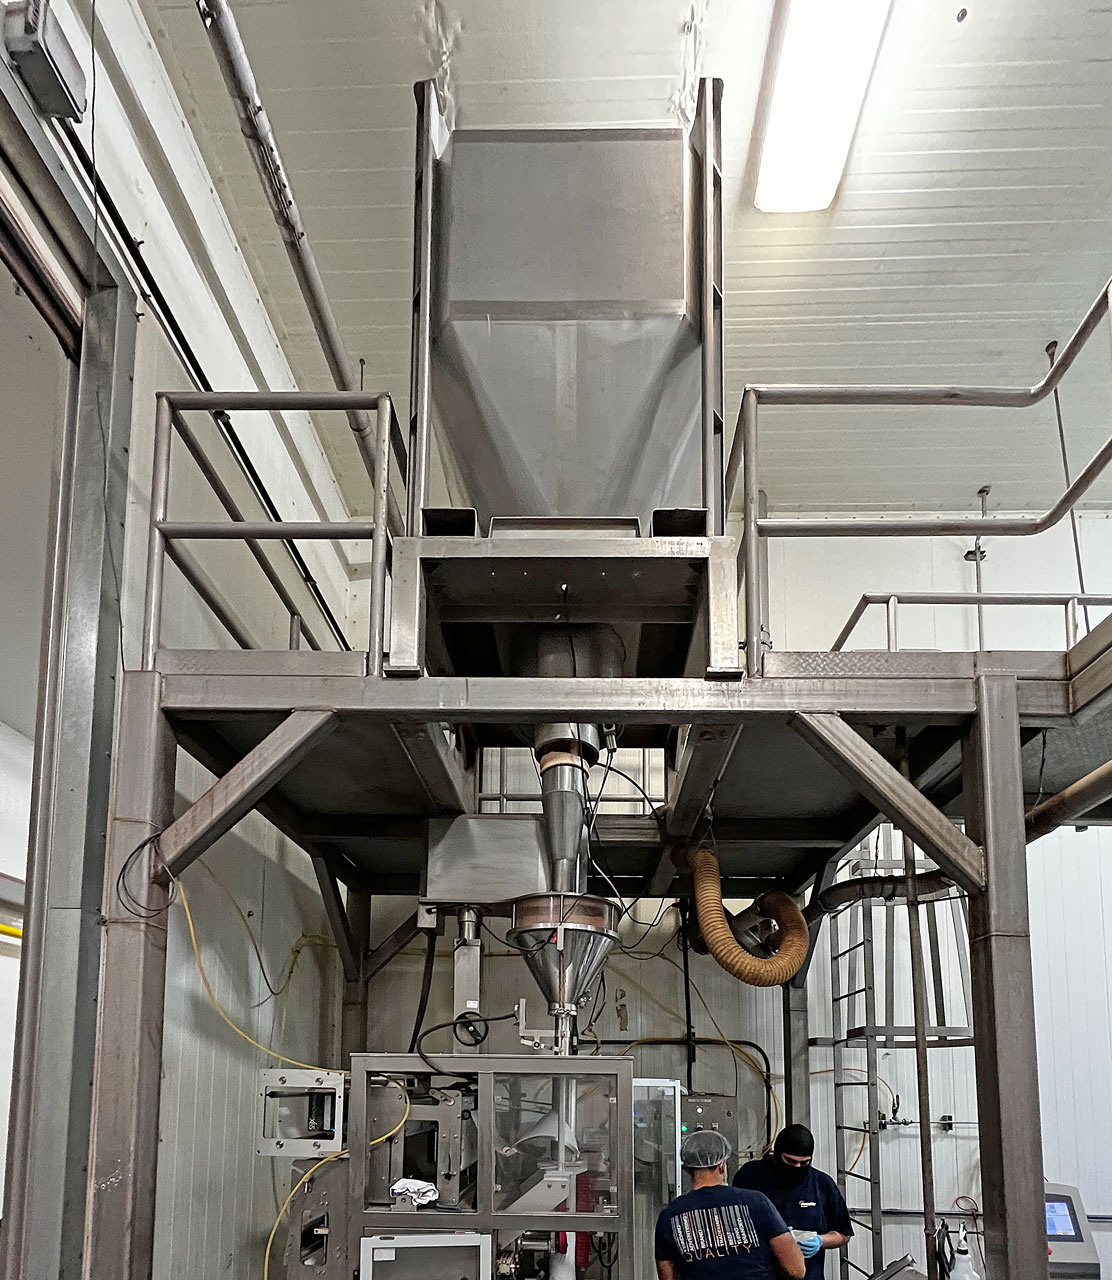 REFILLING A POWDER SACHET PACKING MACHINE USING IBC CONTAINERS